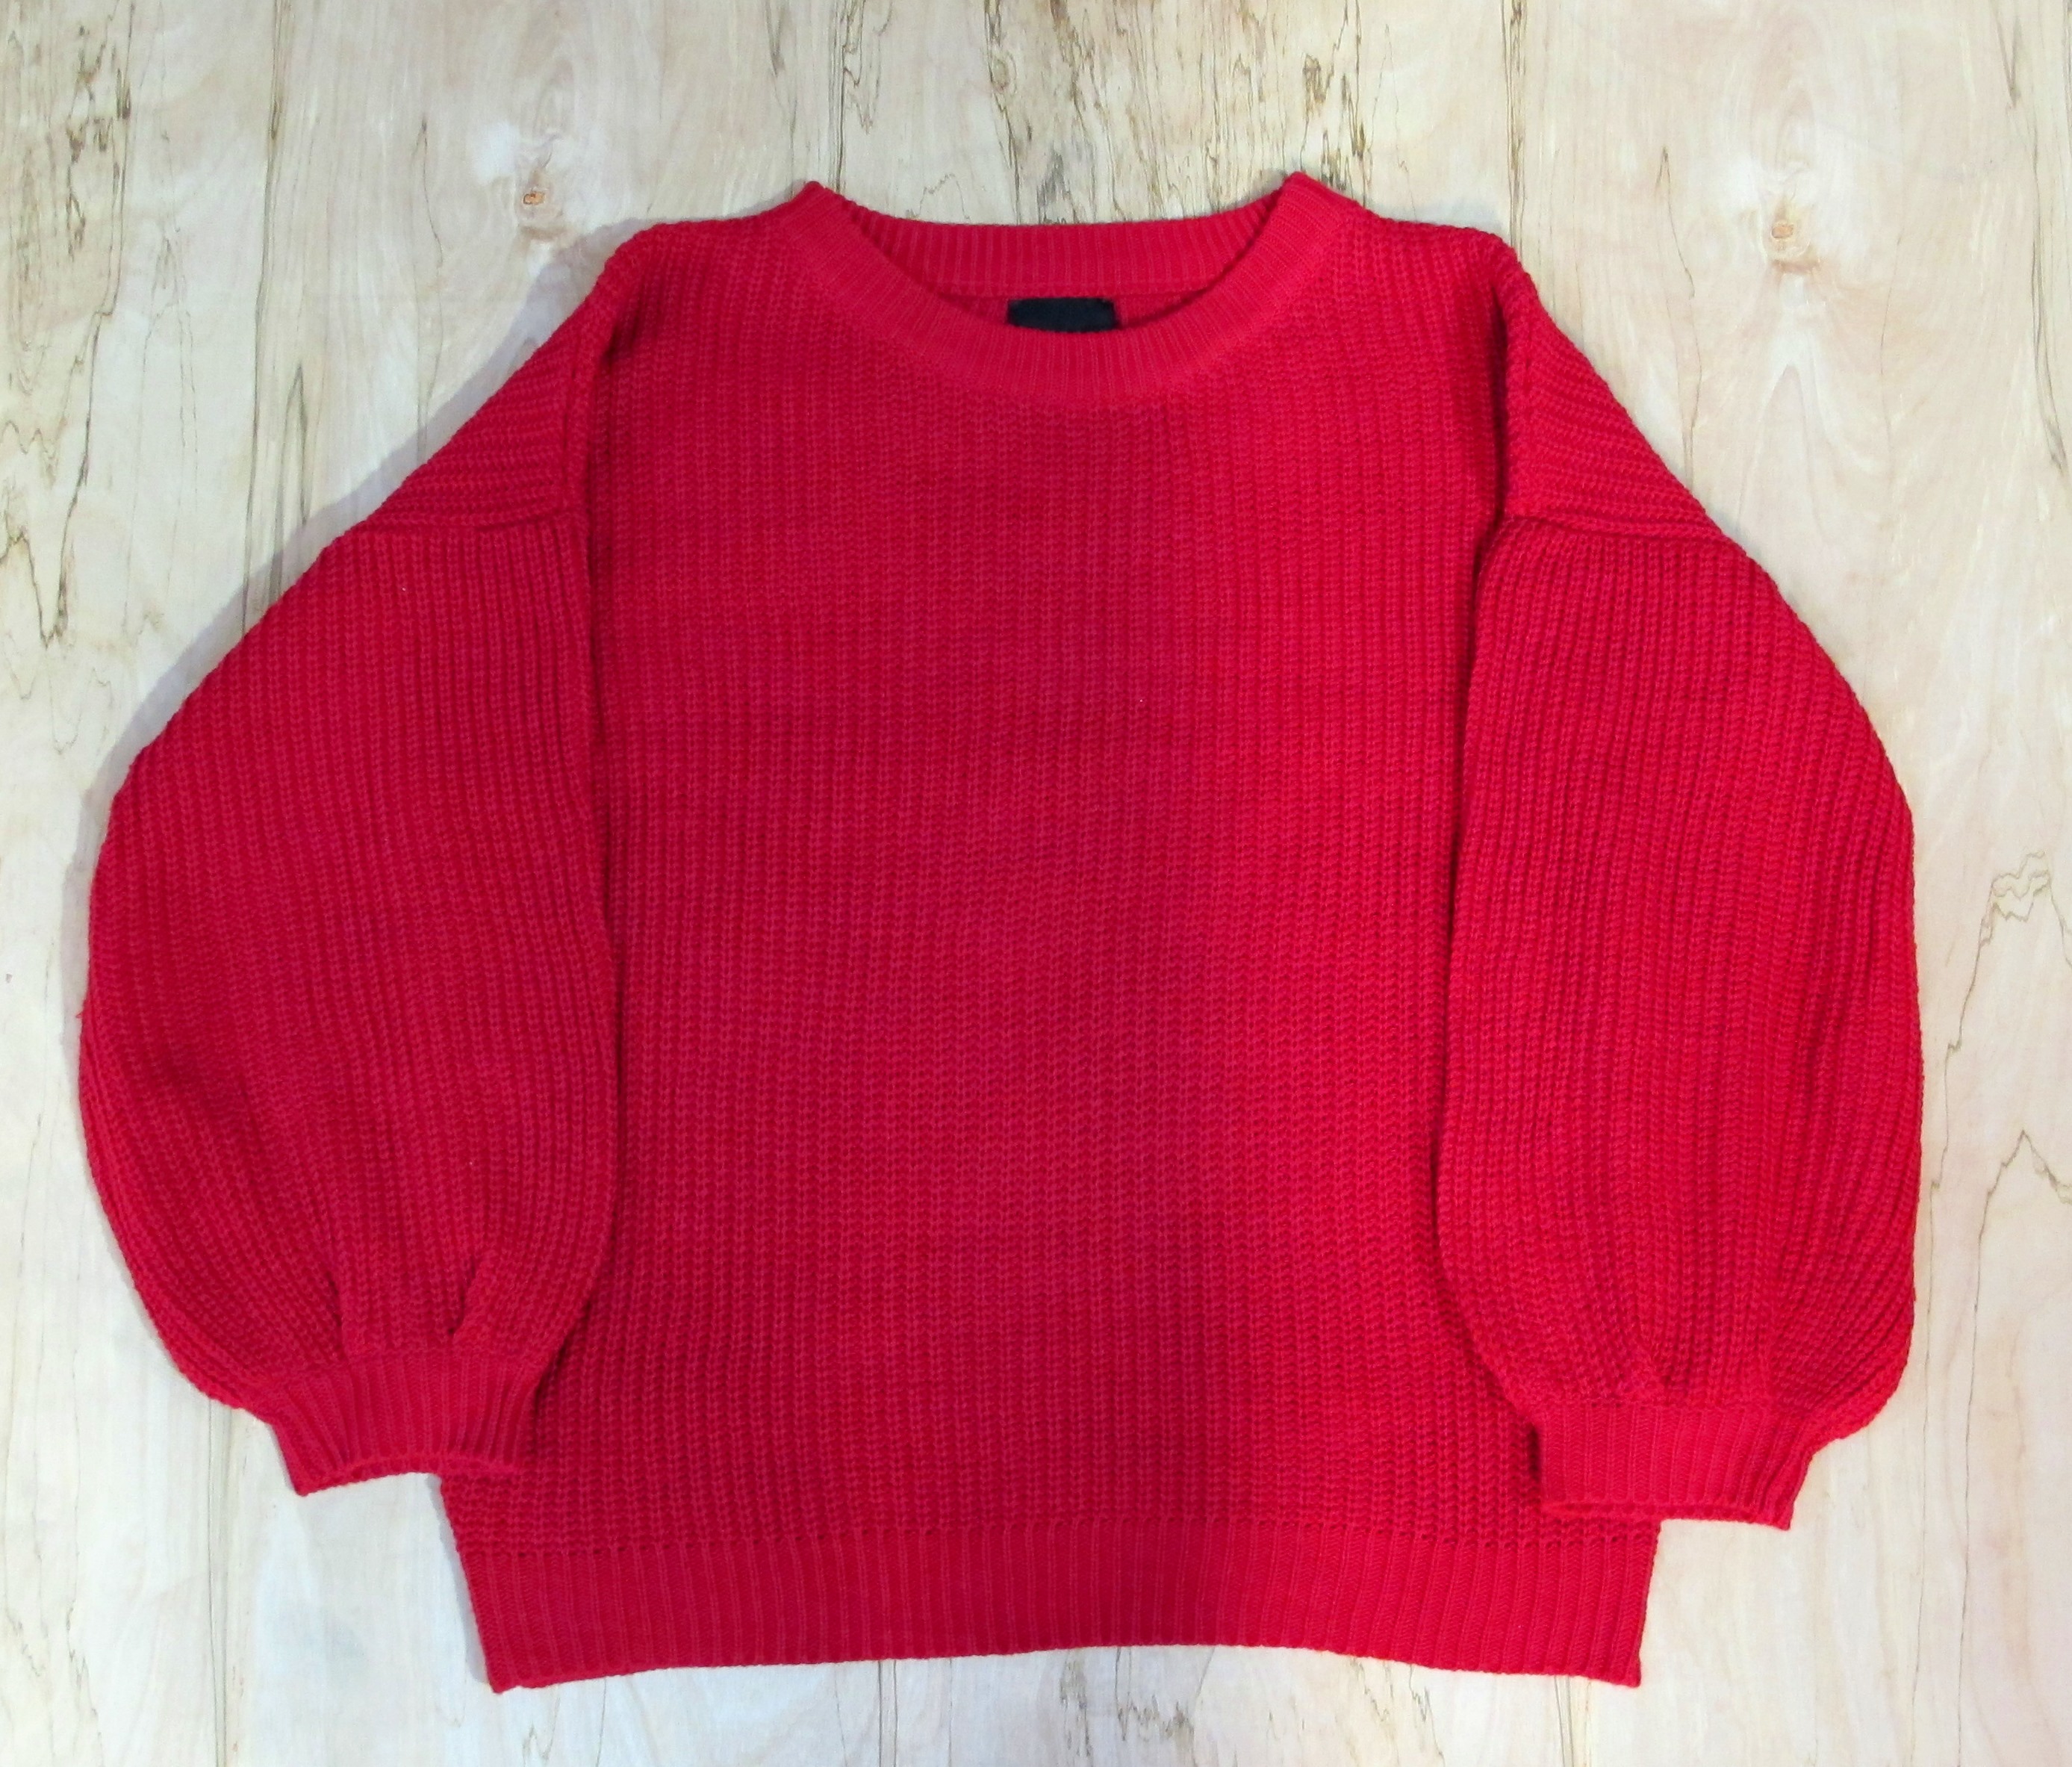 New Arrivals: Red and Black Pieces for Winter - Crossroads